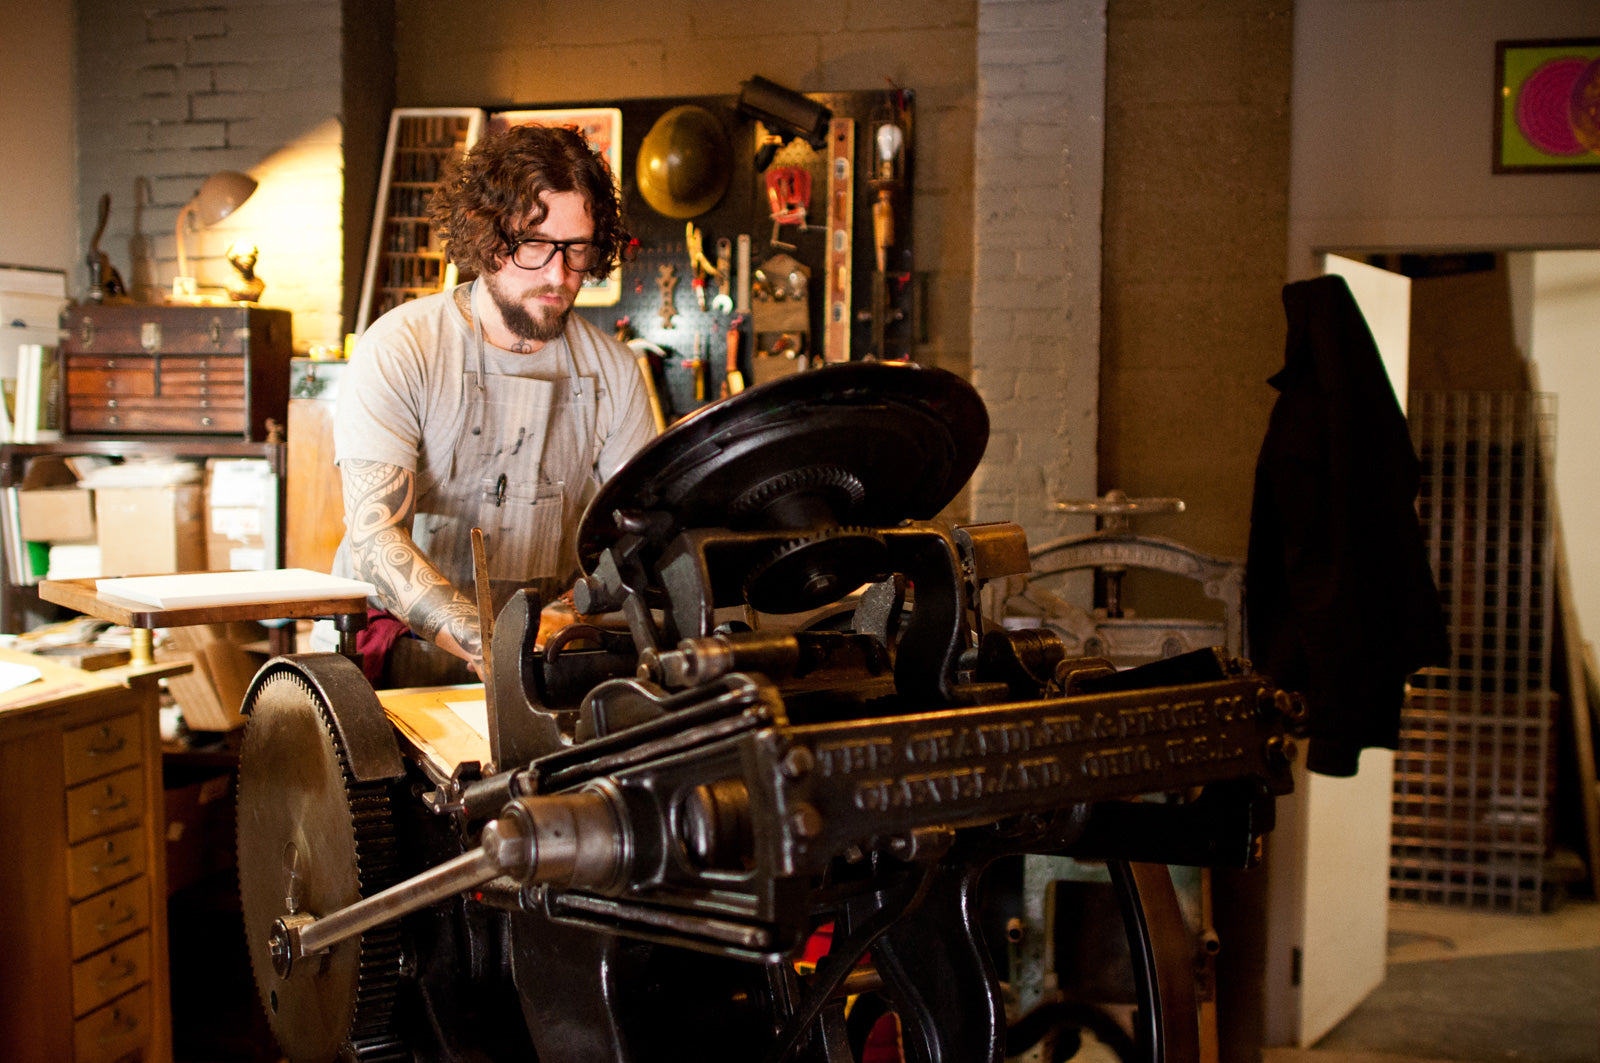 A man is standing up and operating a printing press.